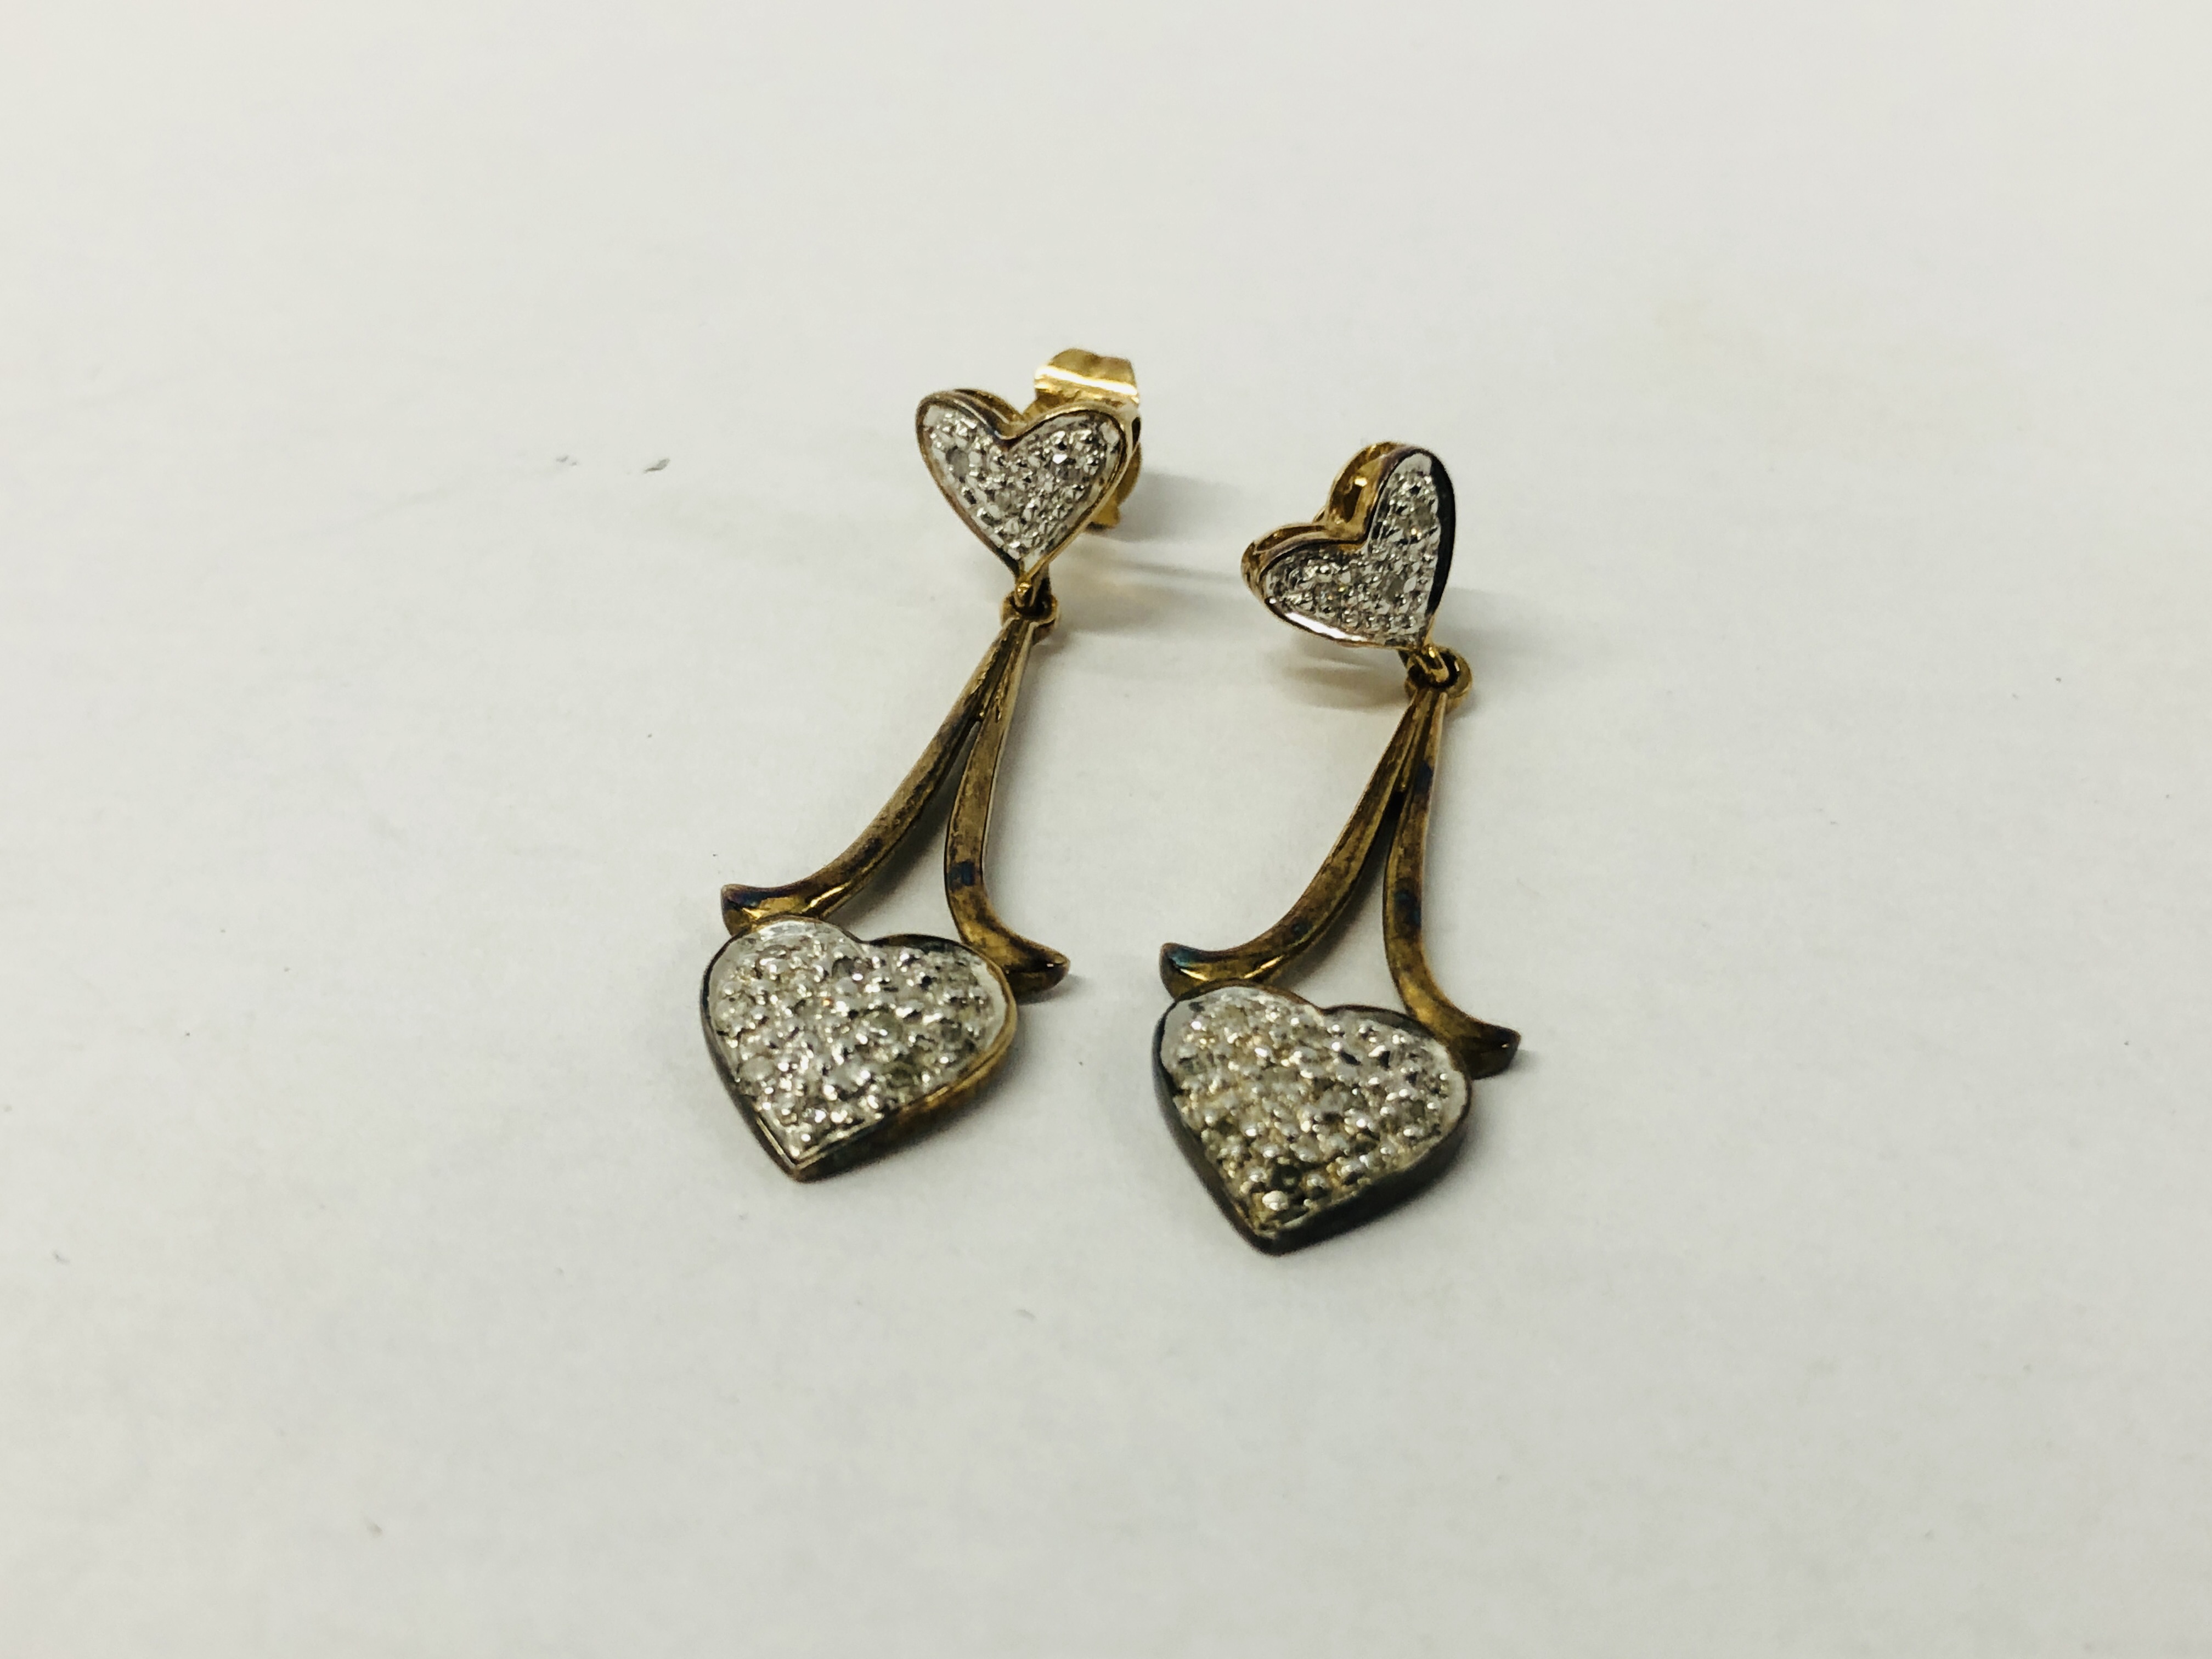 2 X PAIRS OF DIAMOND SET EARRINGS MARKED 375 - Image 4 of 6